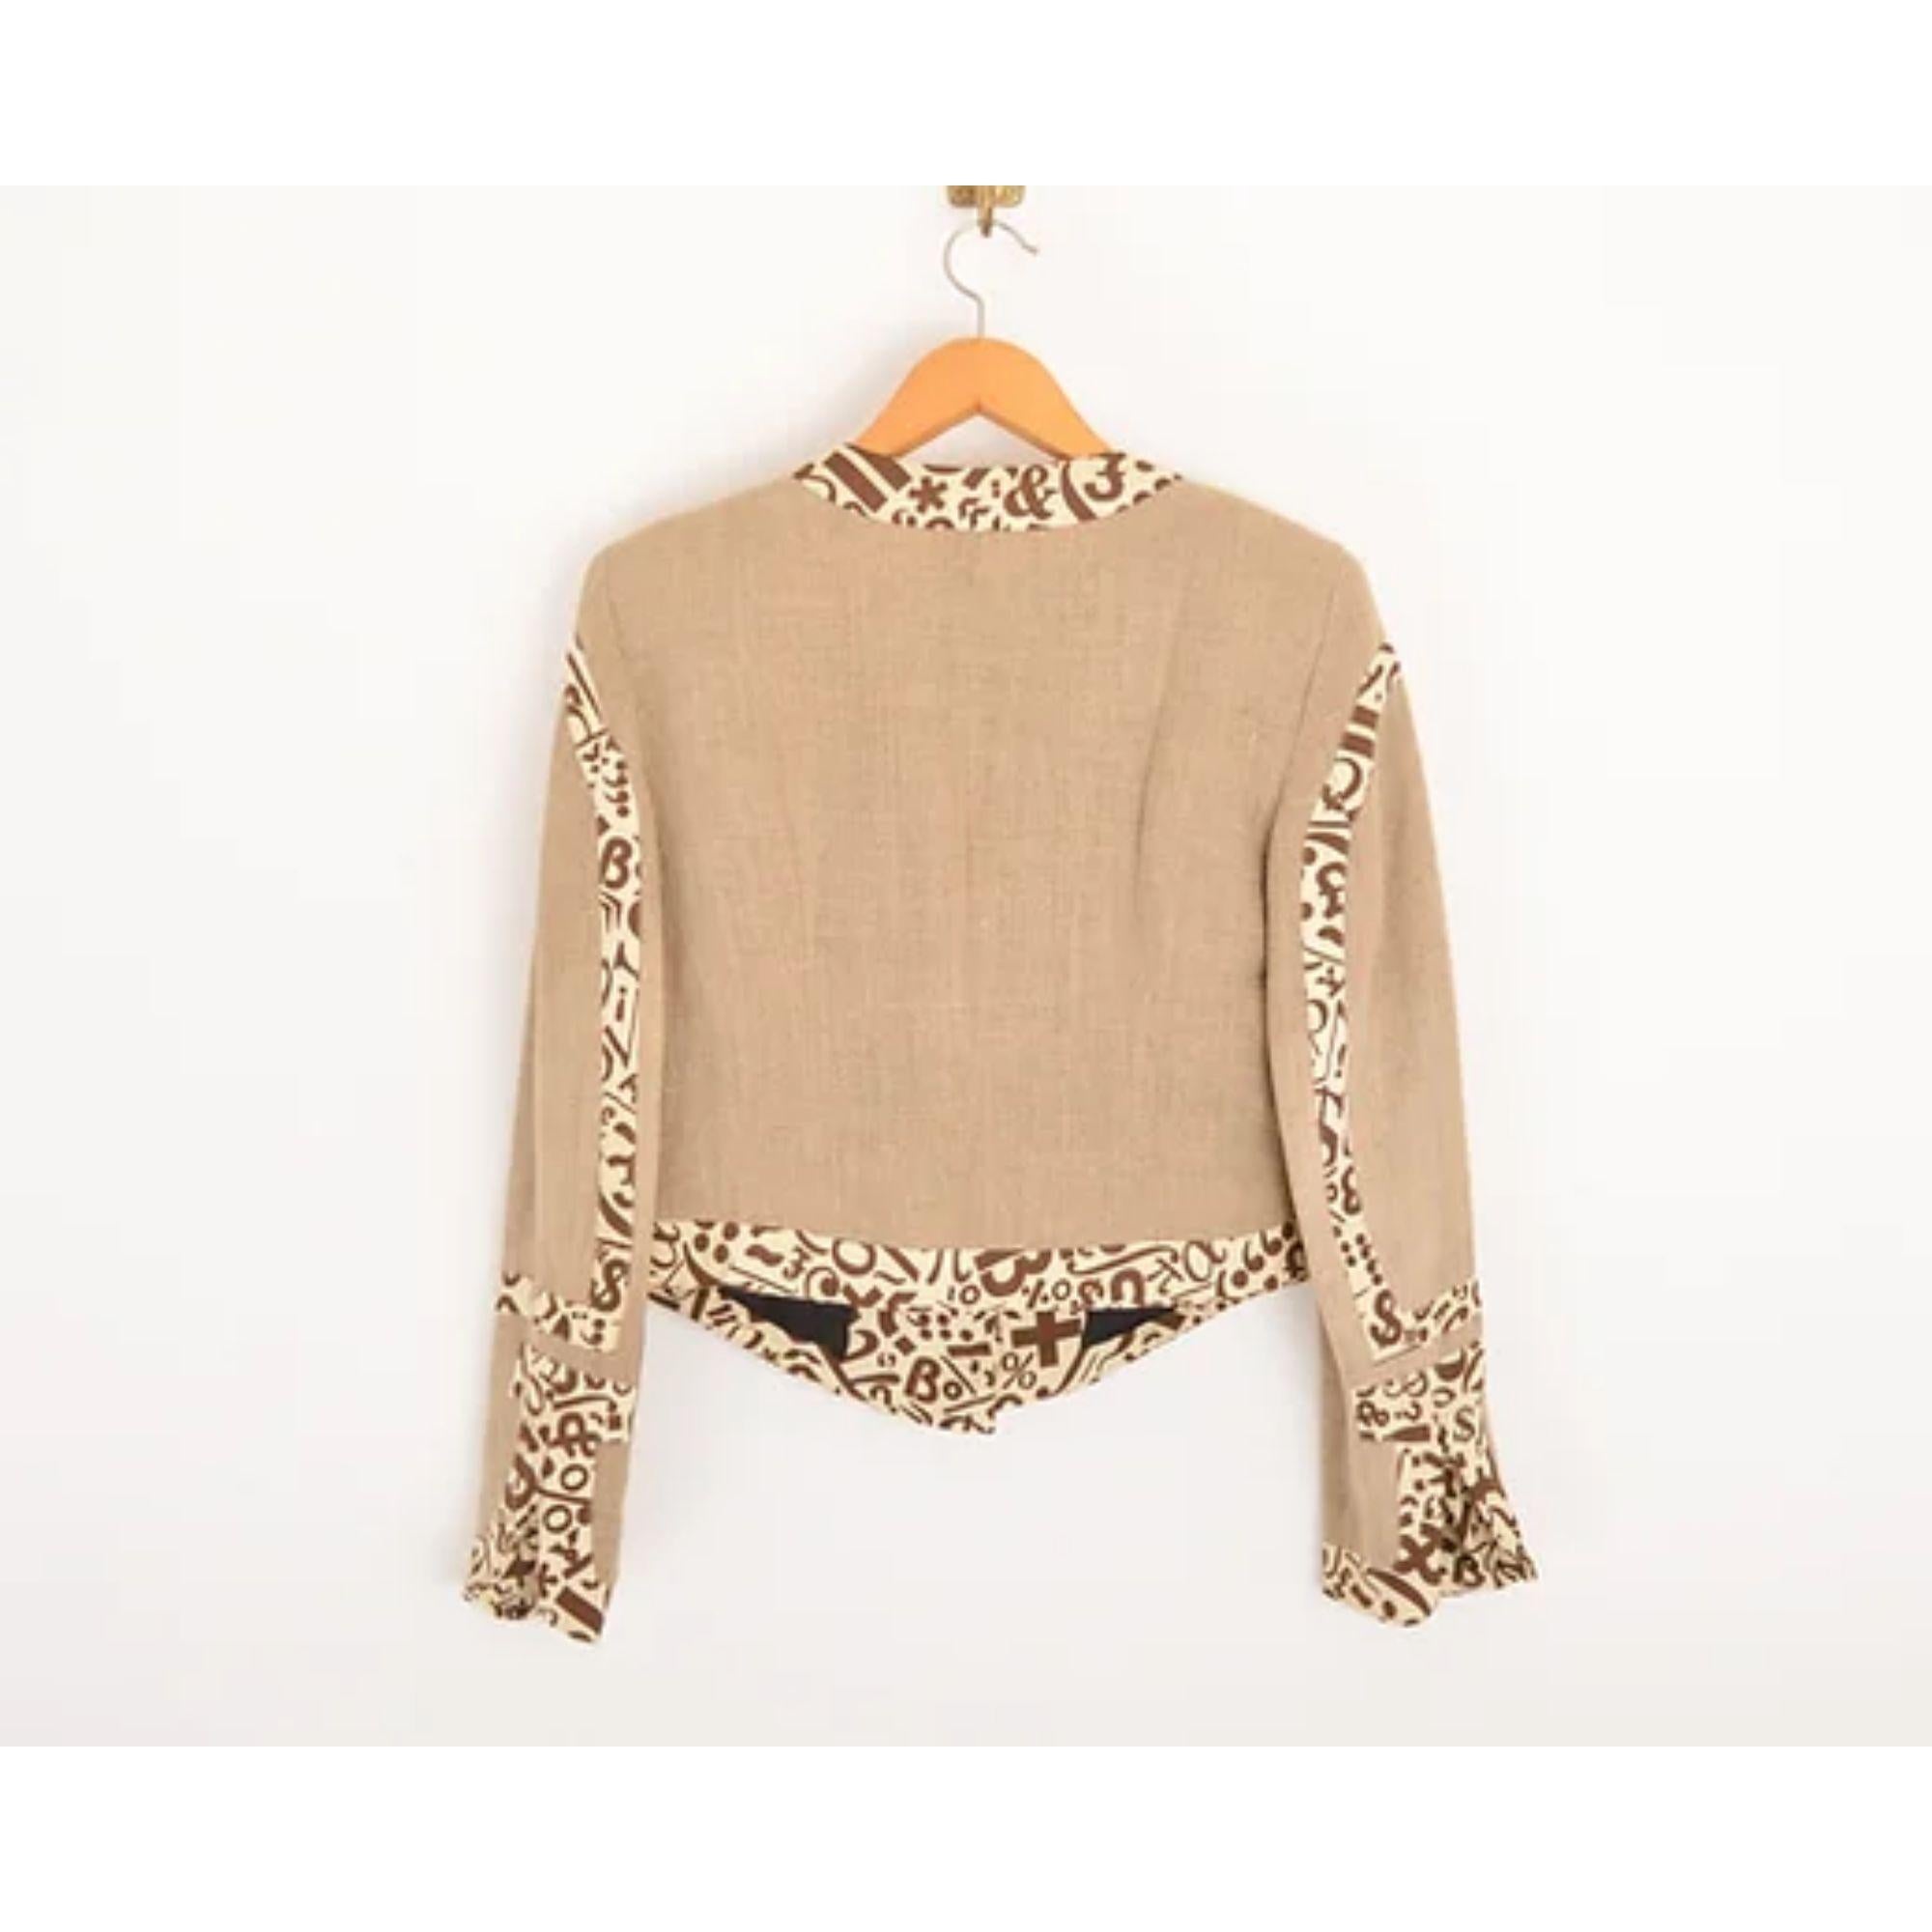 Vintage 1990's Moschino Cheap & Chic label Linen boucle style jacket with playful breast shaped panelling in a cream and brown punctuation print. 

MADE IN ITALY !

Features:
Central line button fasten
'Lets Love Eachother' embossed buttons
Boucle